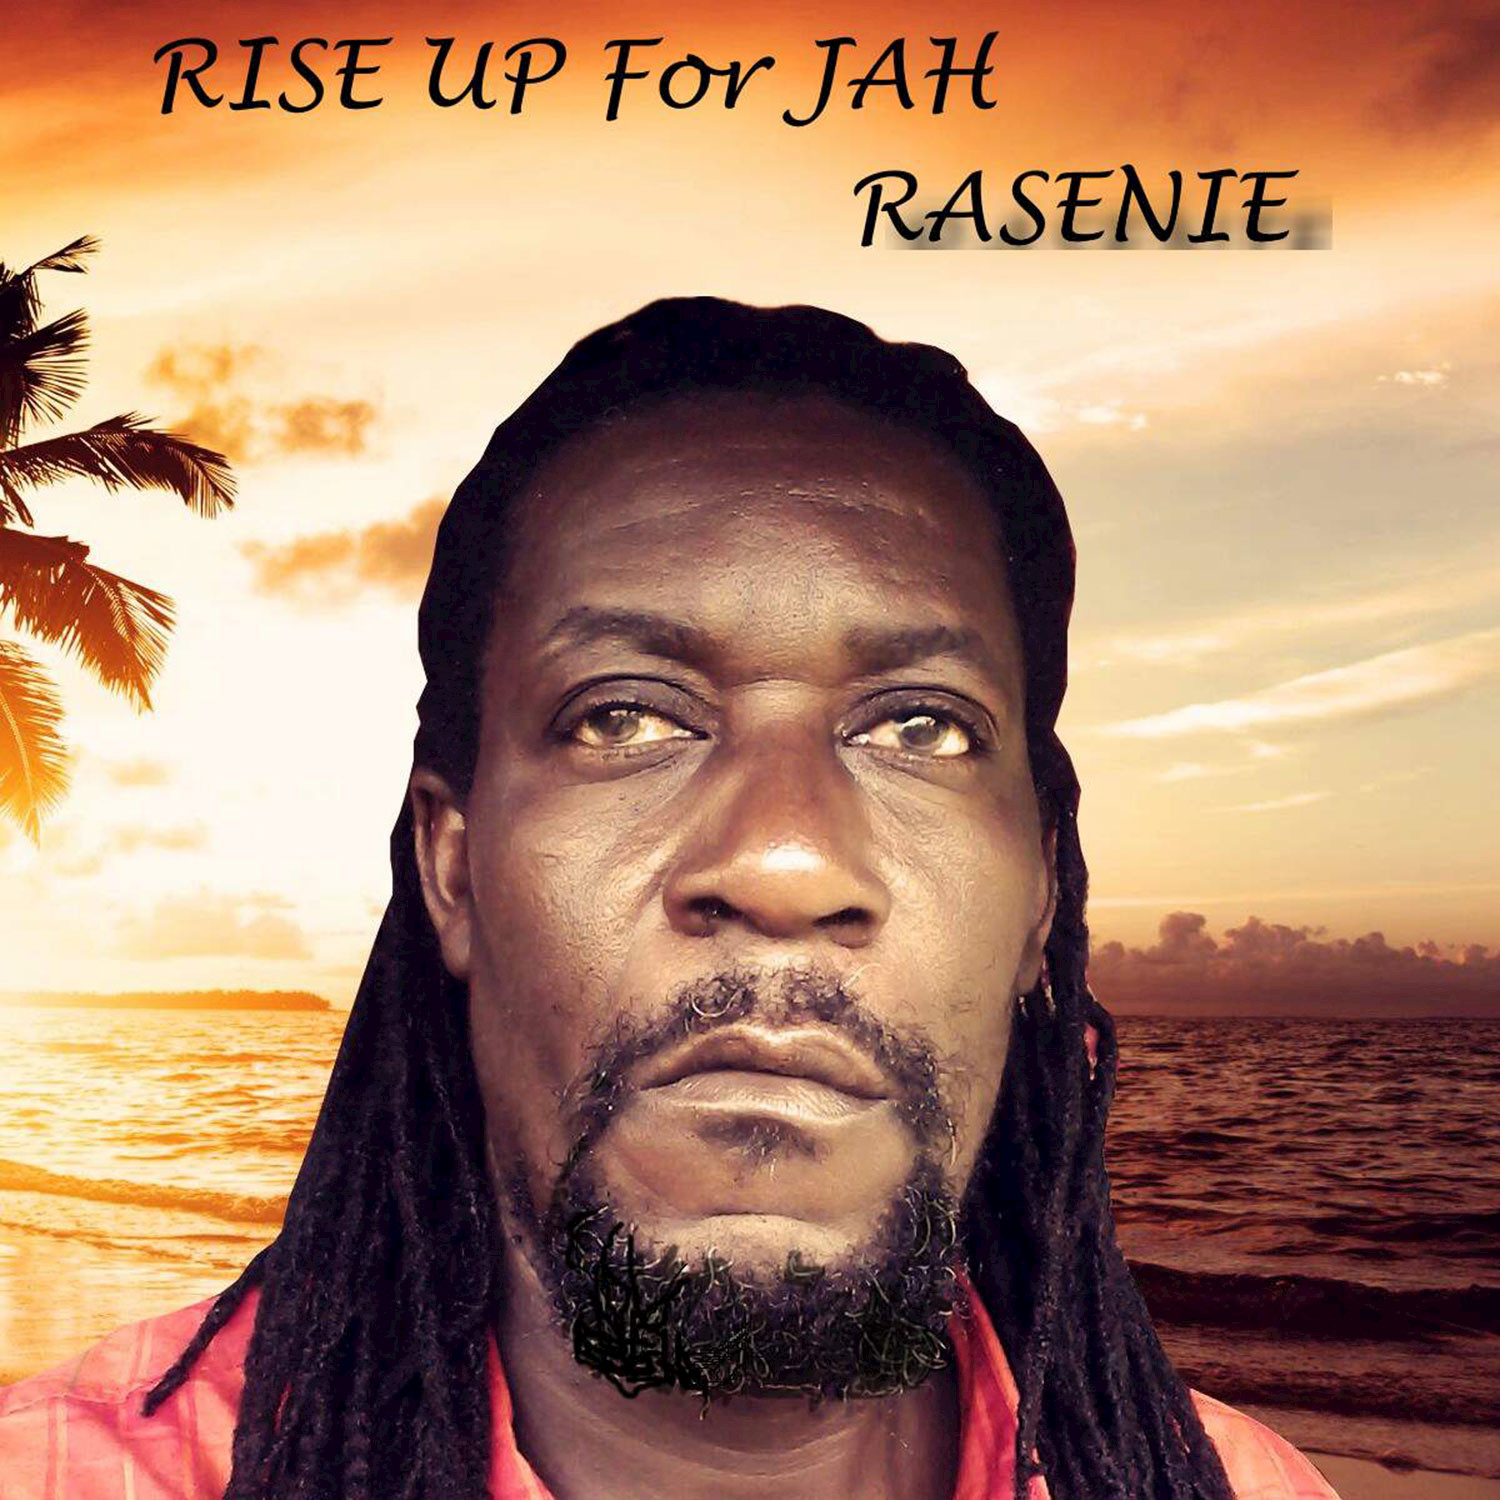 Rise up for Jah